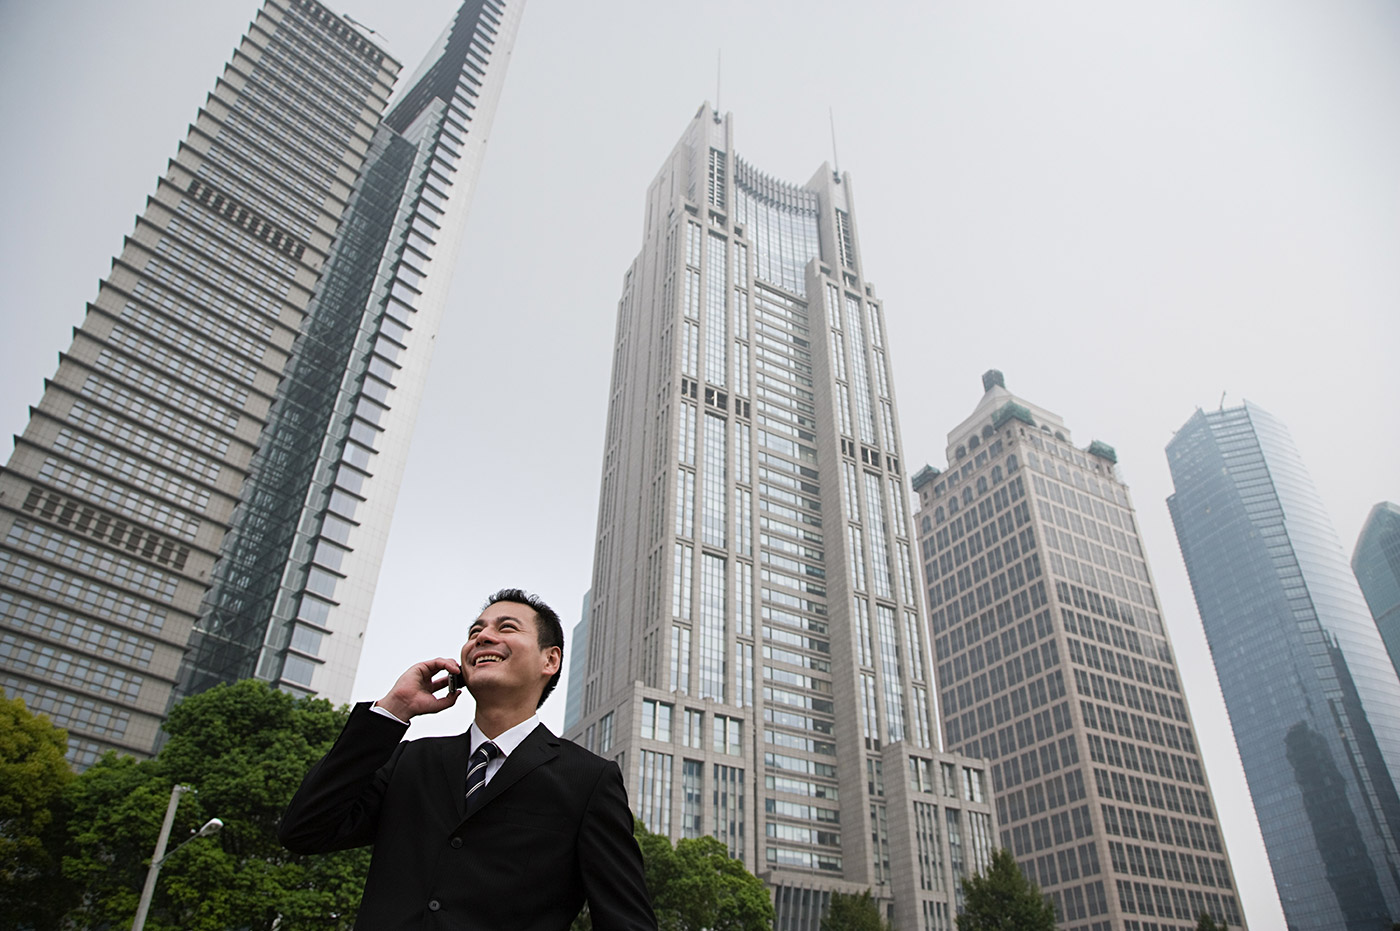 A man talking on a cellphone in front of some skyscrapers.